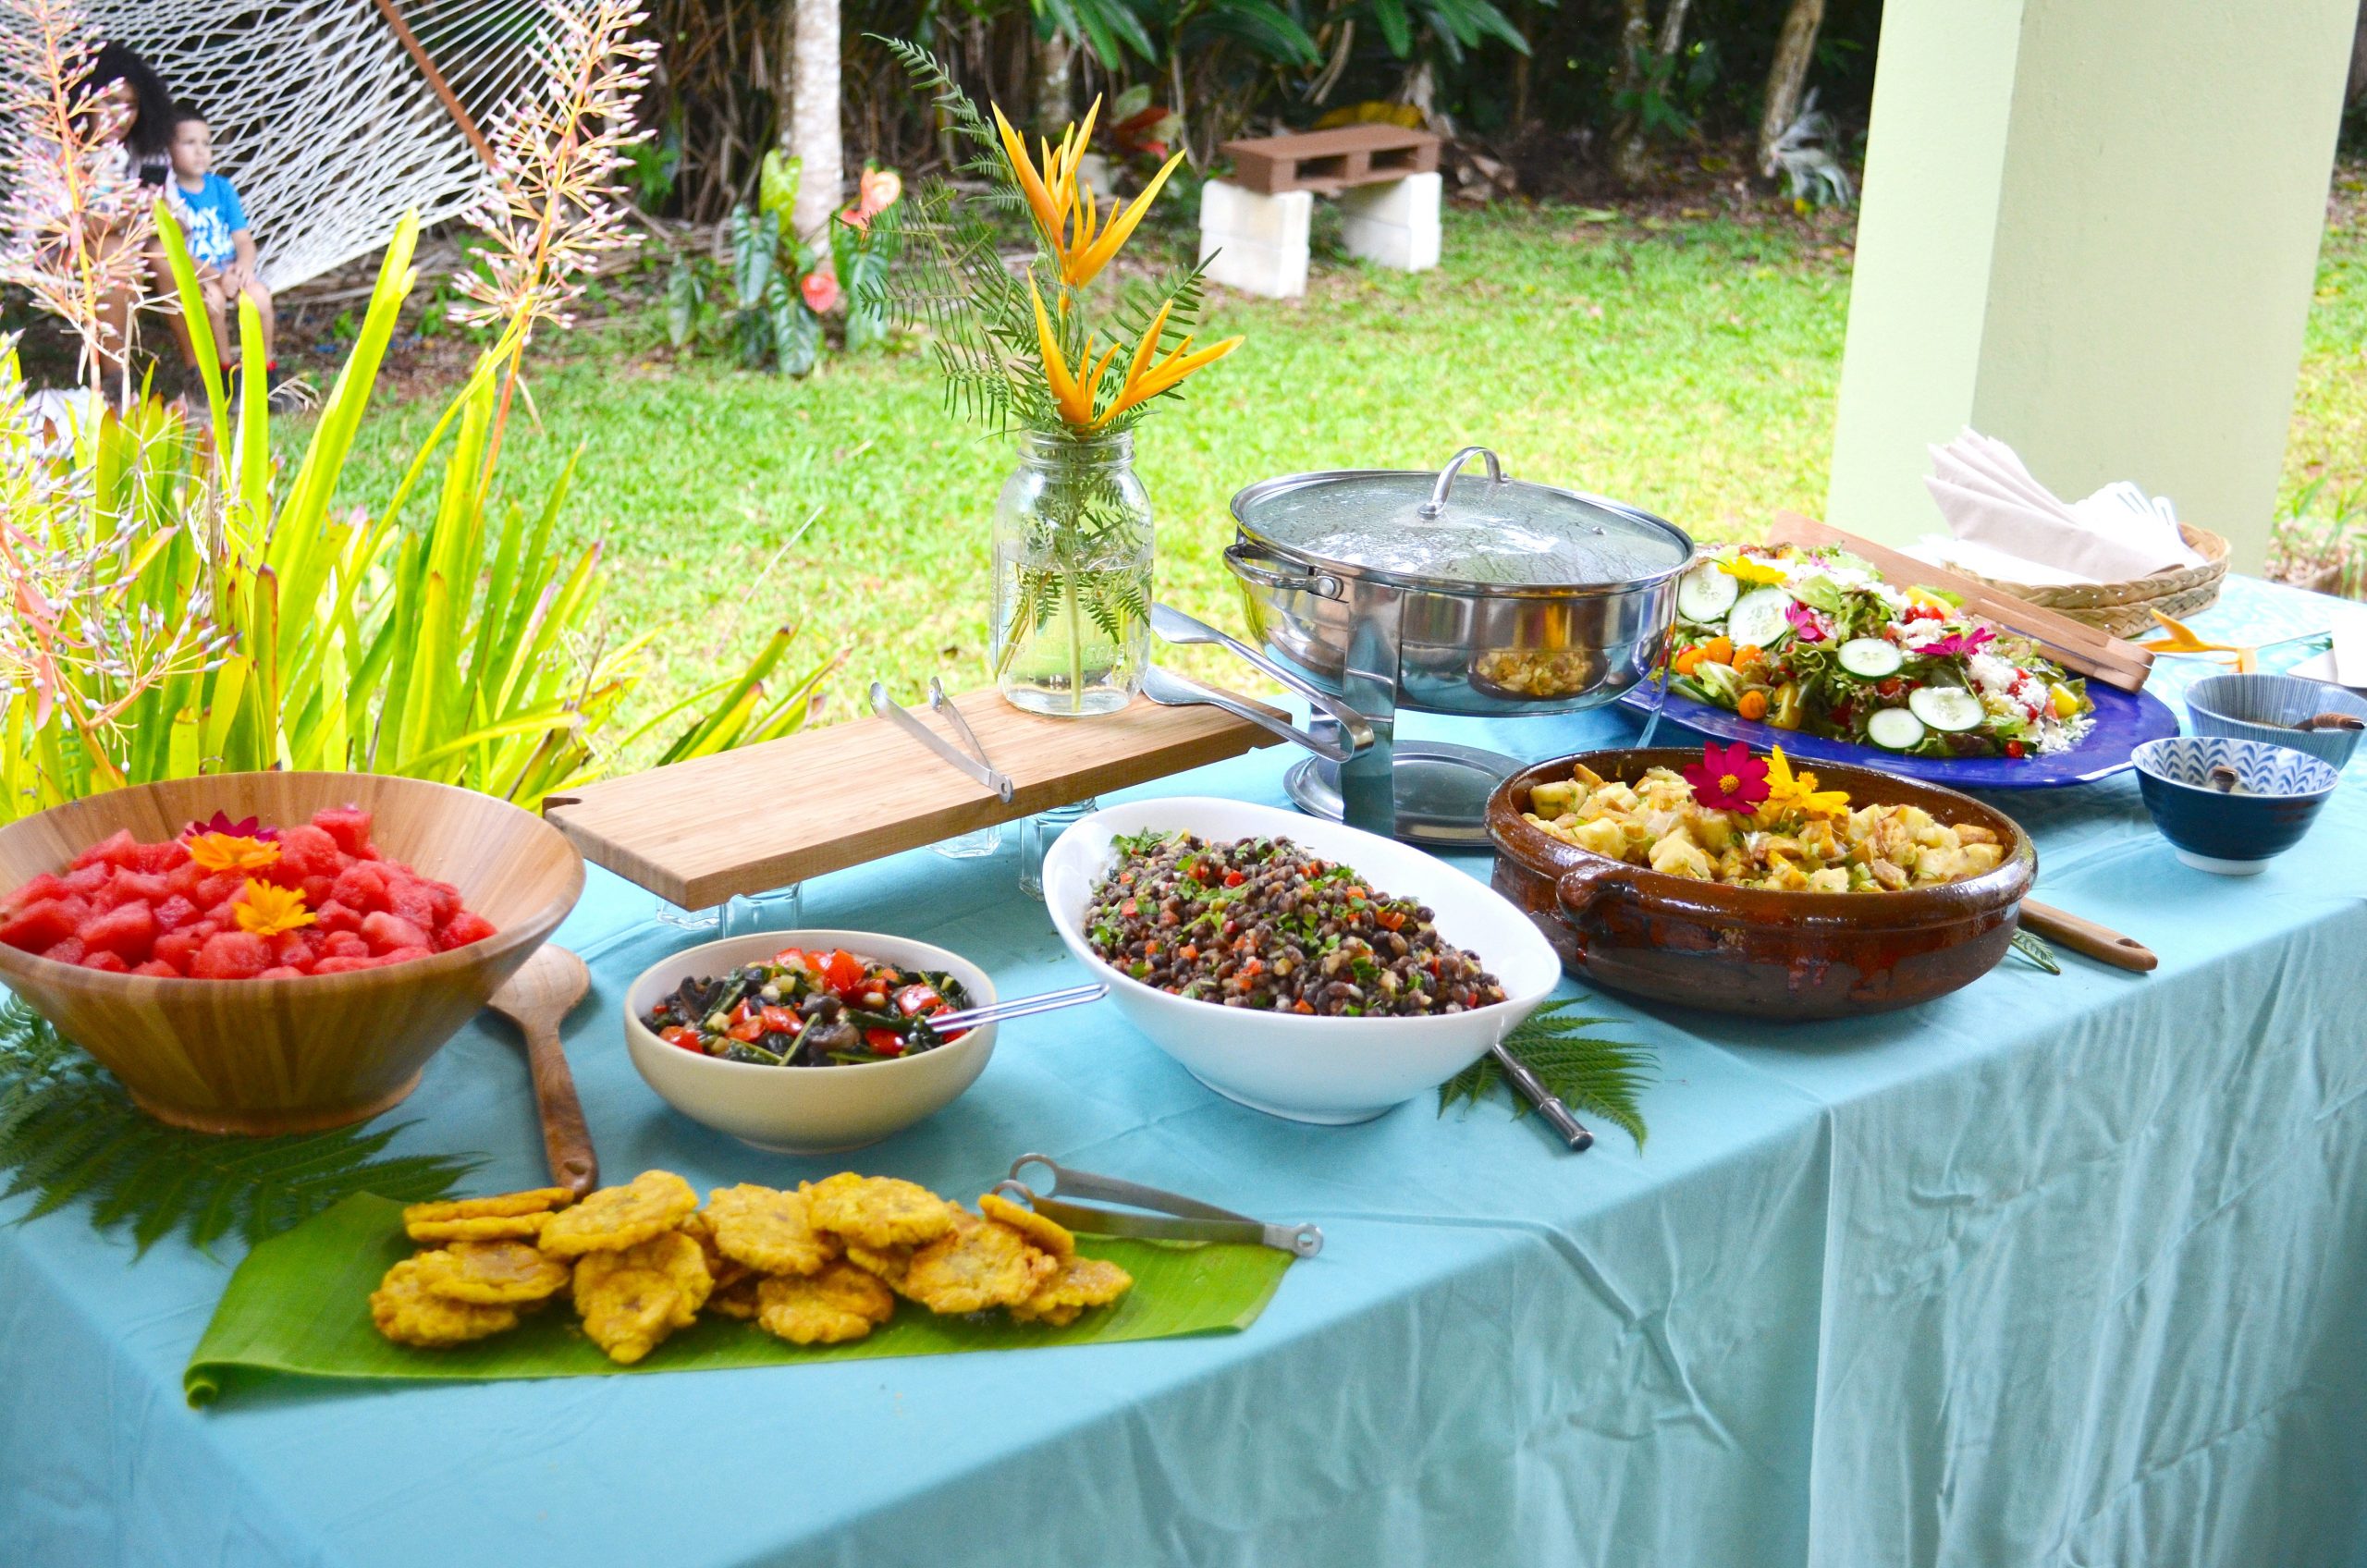 A table spread with various dishes filled with food